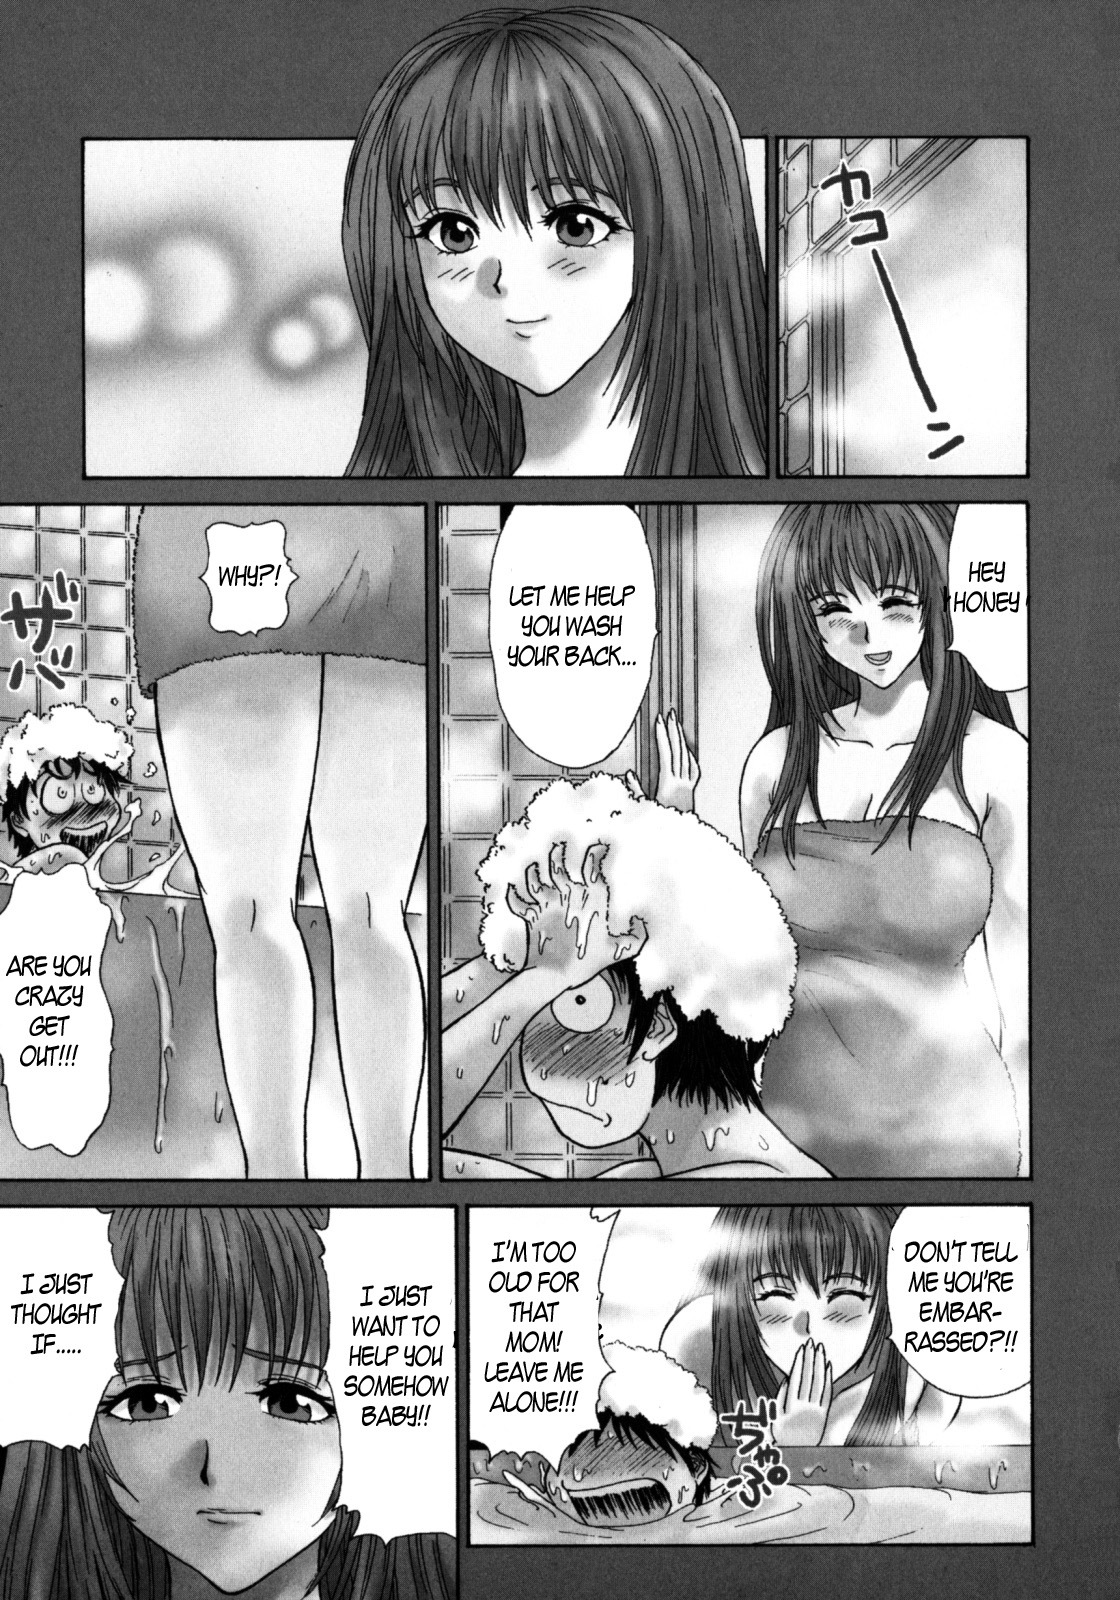 Concerned Mother [English] [Rewrite] [EZ Rewriter] page 3 full